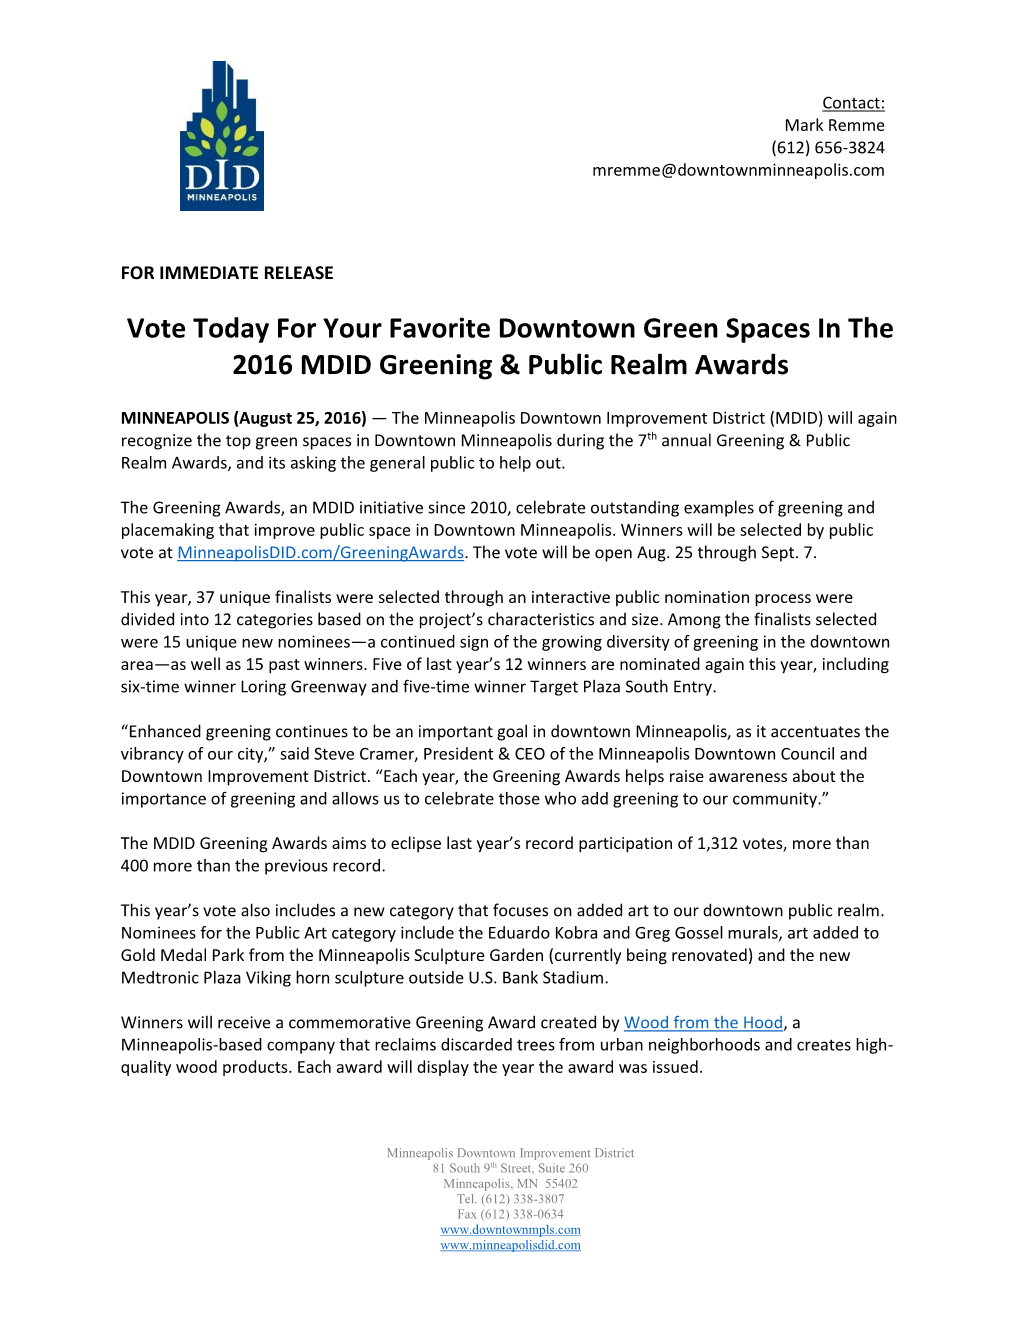 Vote Today for Your Favorite Downtown Green Spaces in the 2016 MDID Greening & Public Realm Awards